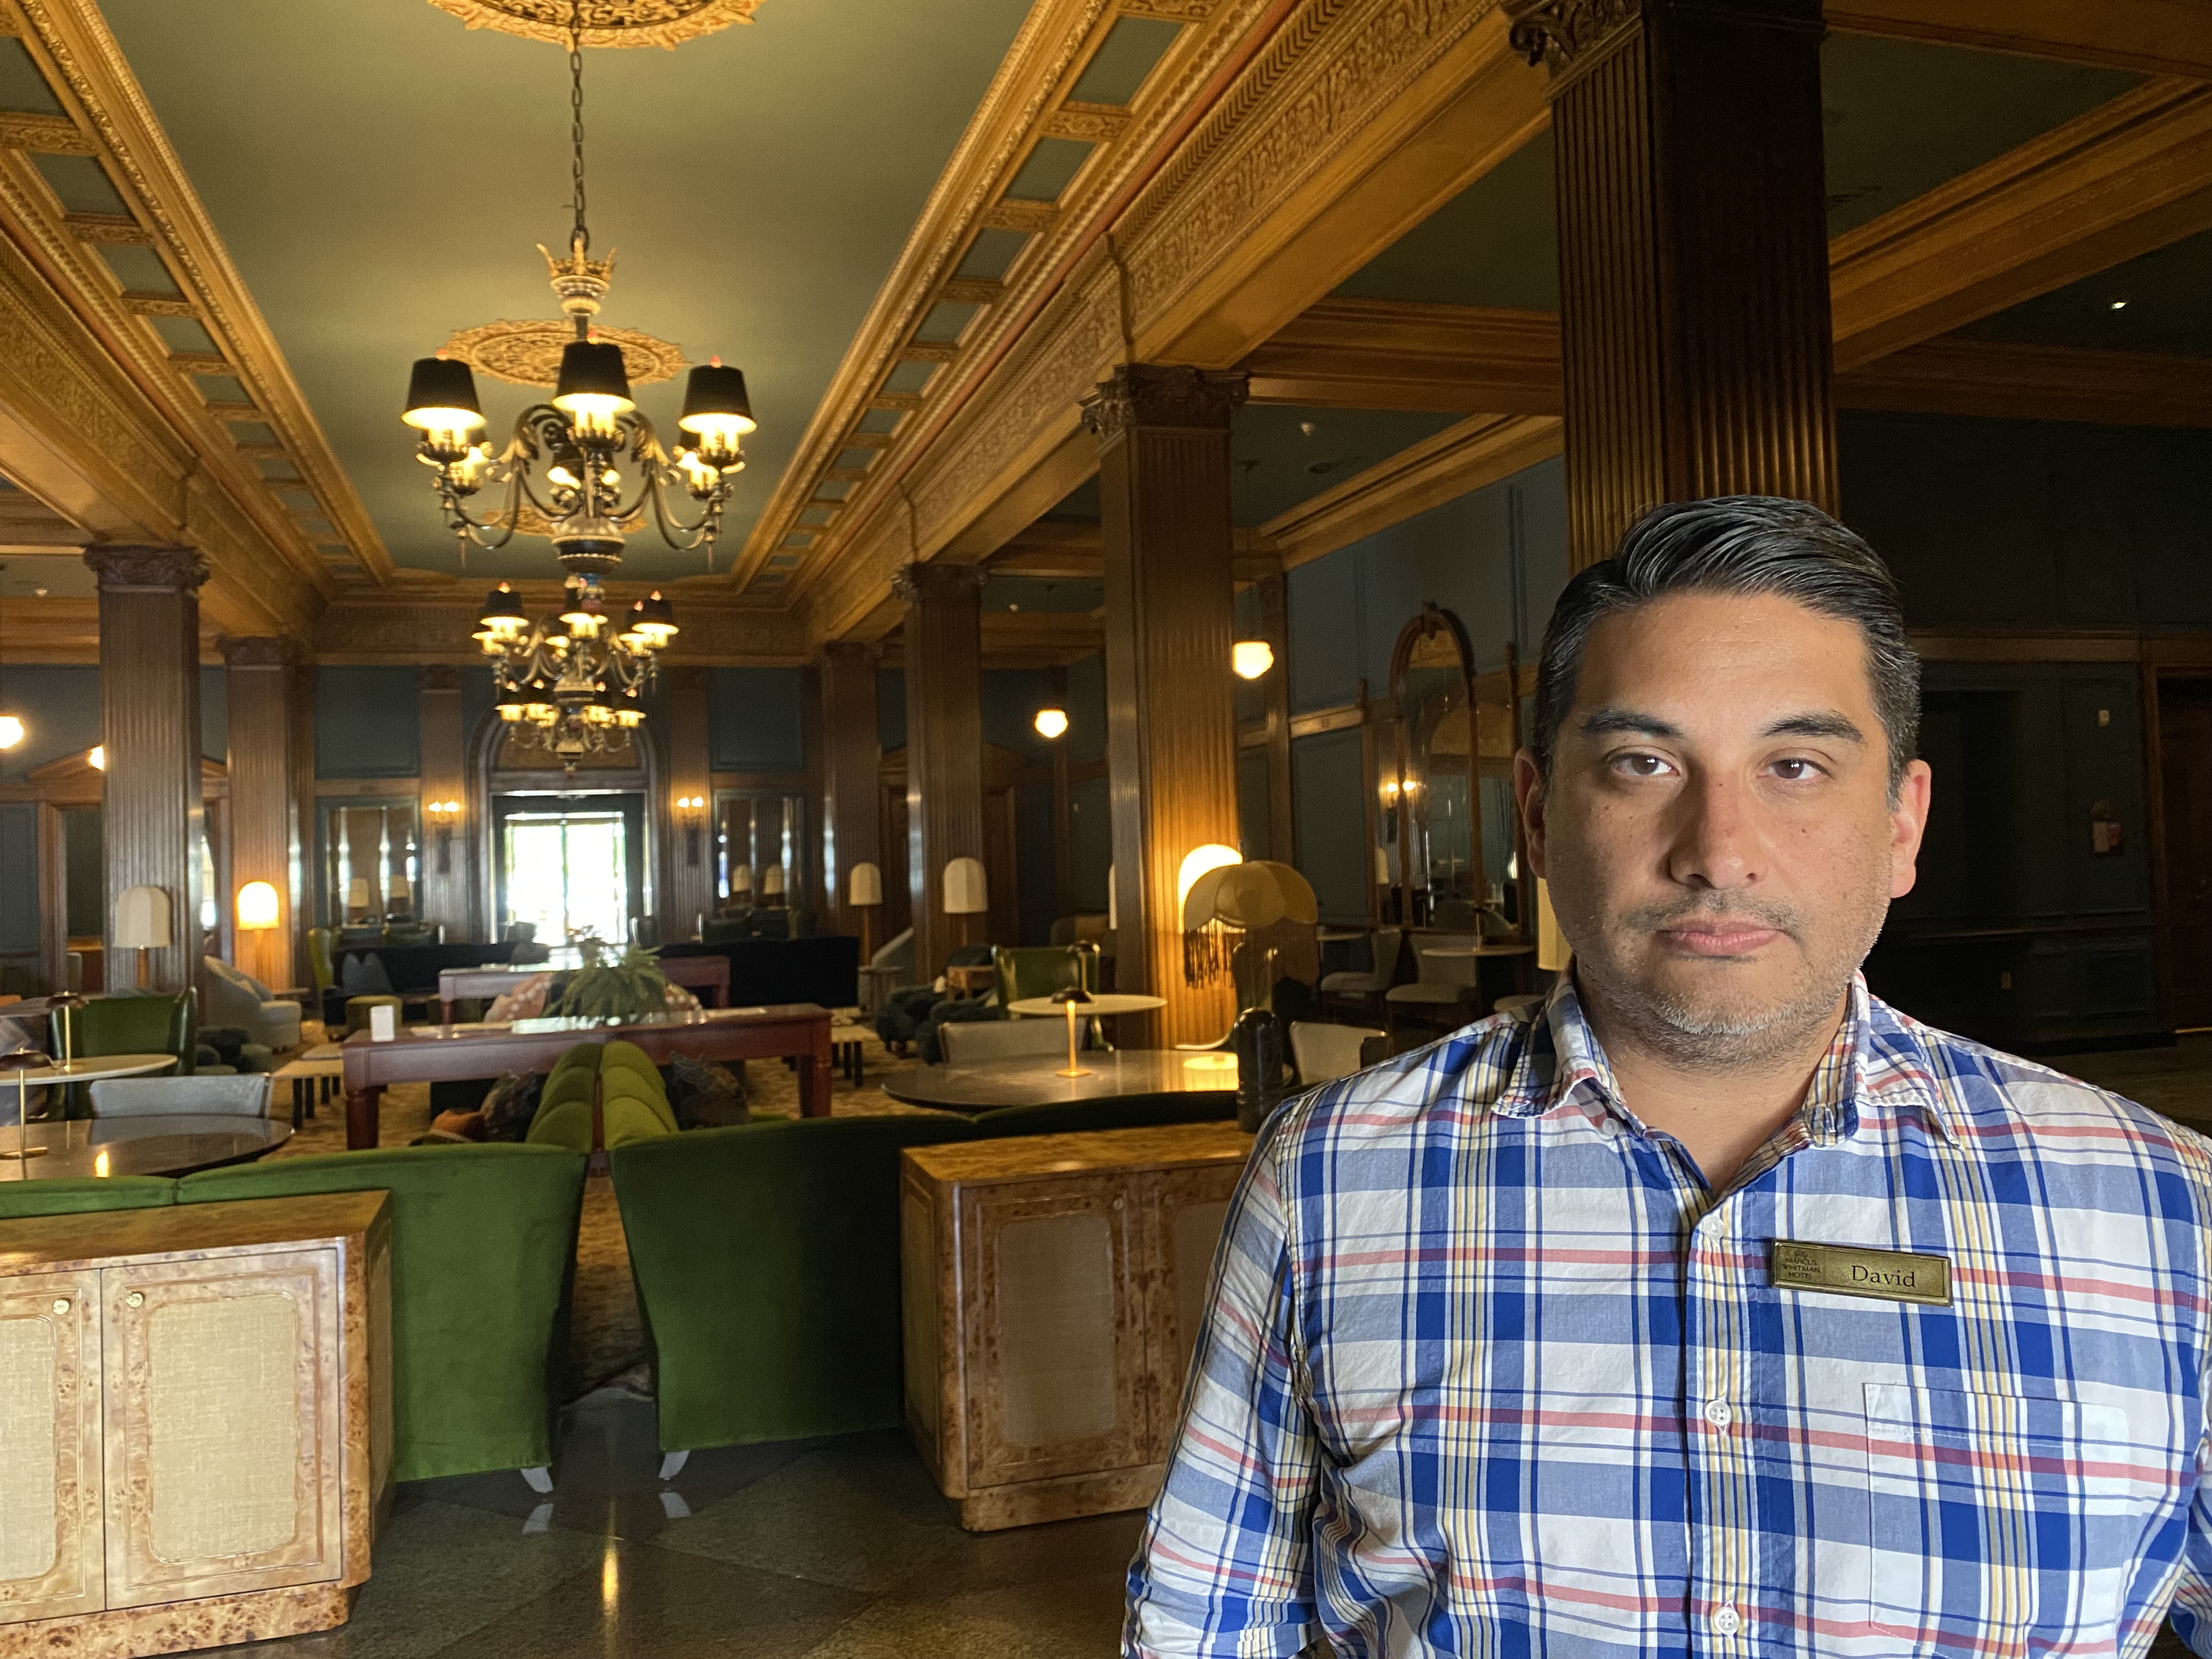 David Gavaldon, interim Marcus Whitman hotel manager, grimly surveys the massive lobby without any guests in Walla Walla